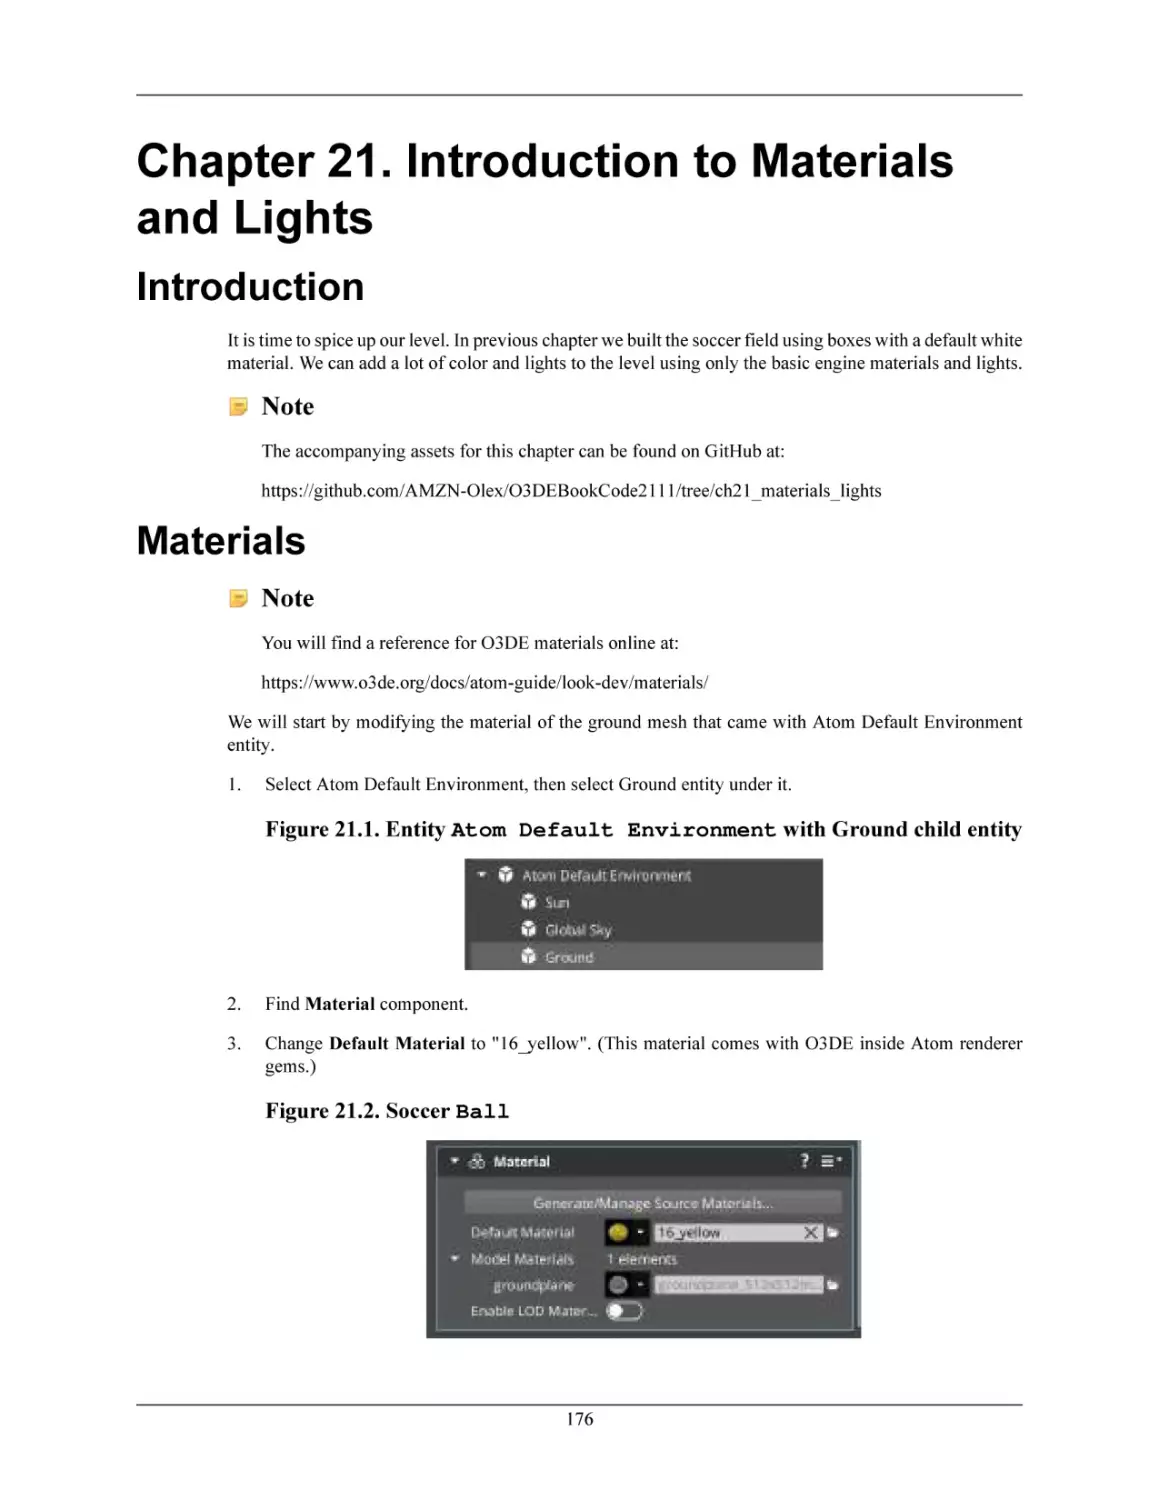 Chapter 21. Introduction to Materials and Lights
Introduction
Materials